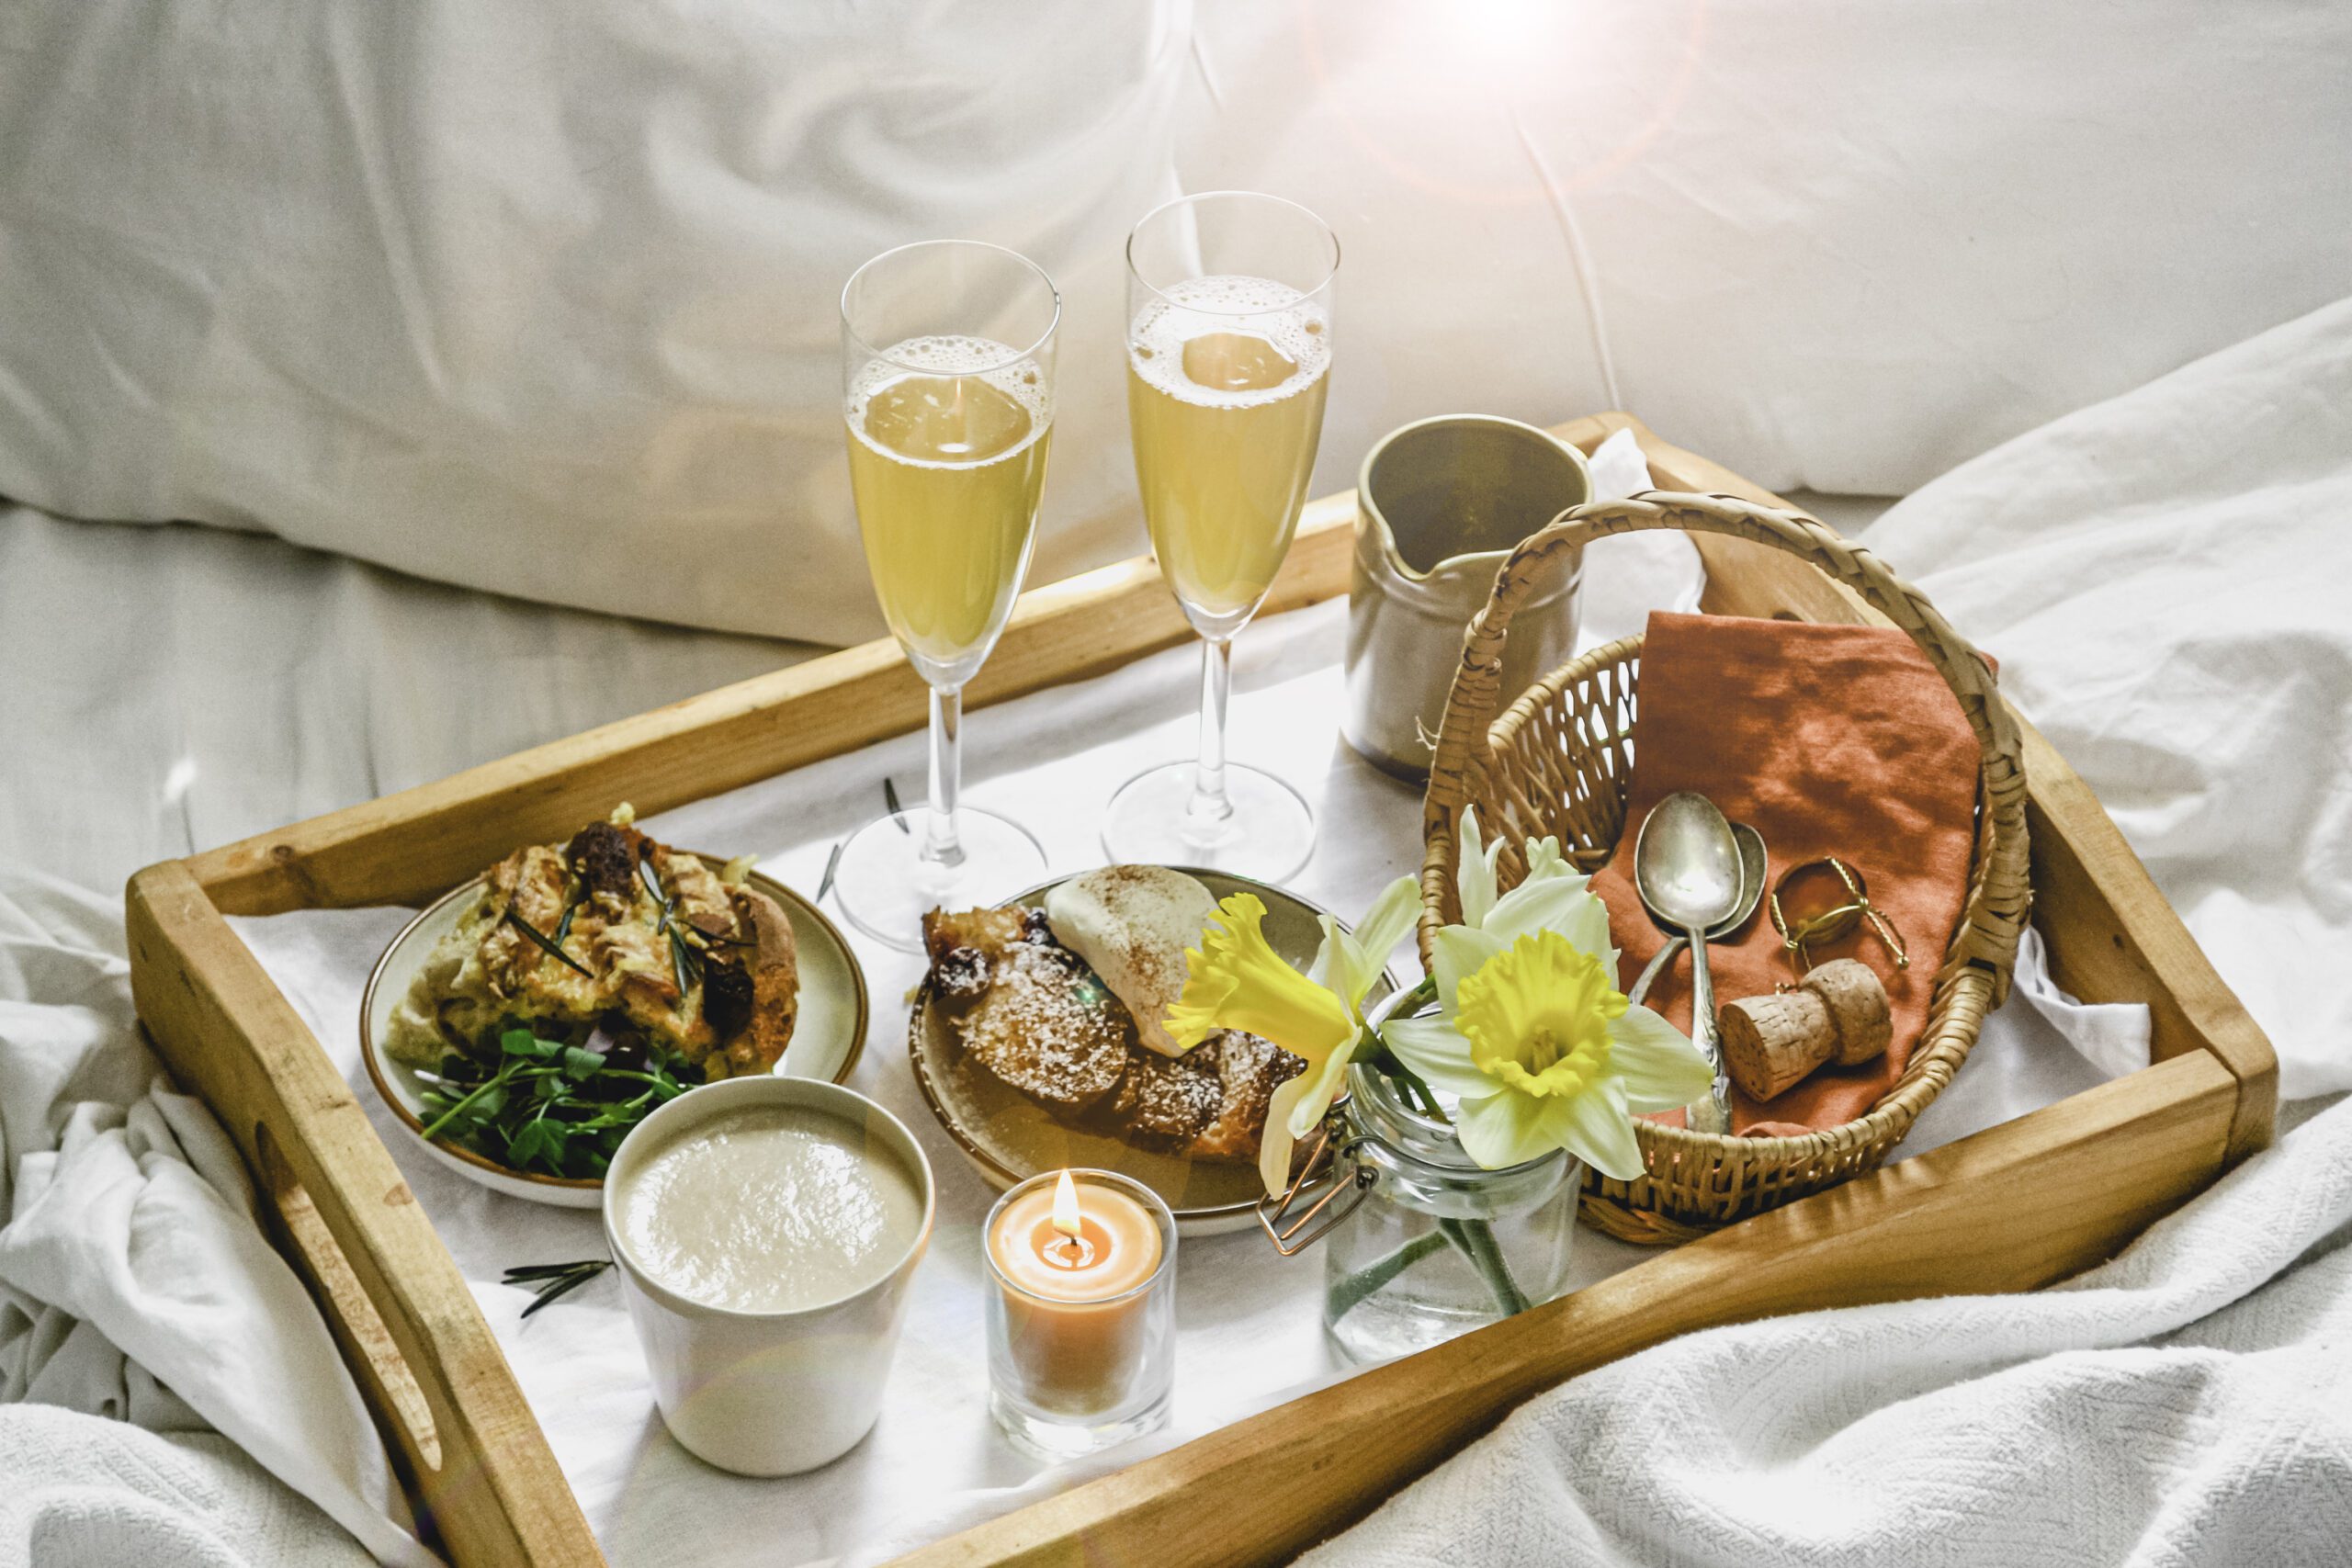 colleen williamson recommends pictures of breakfast in bed pic